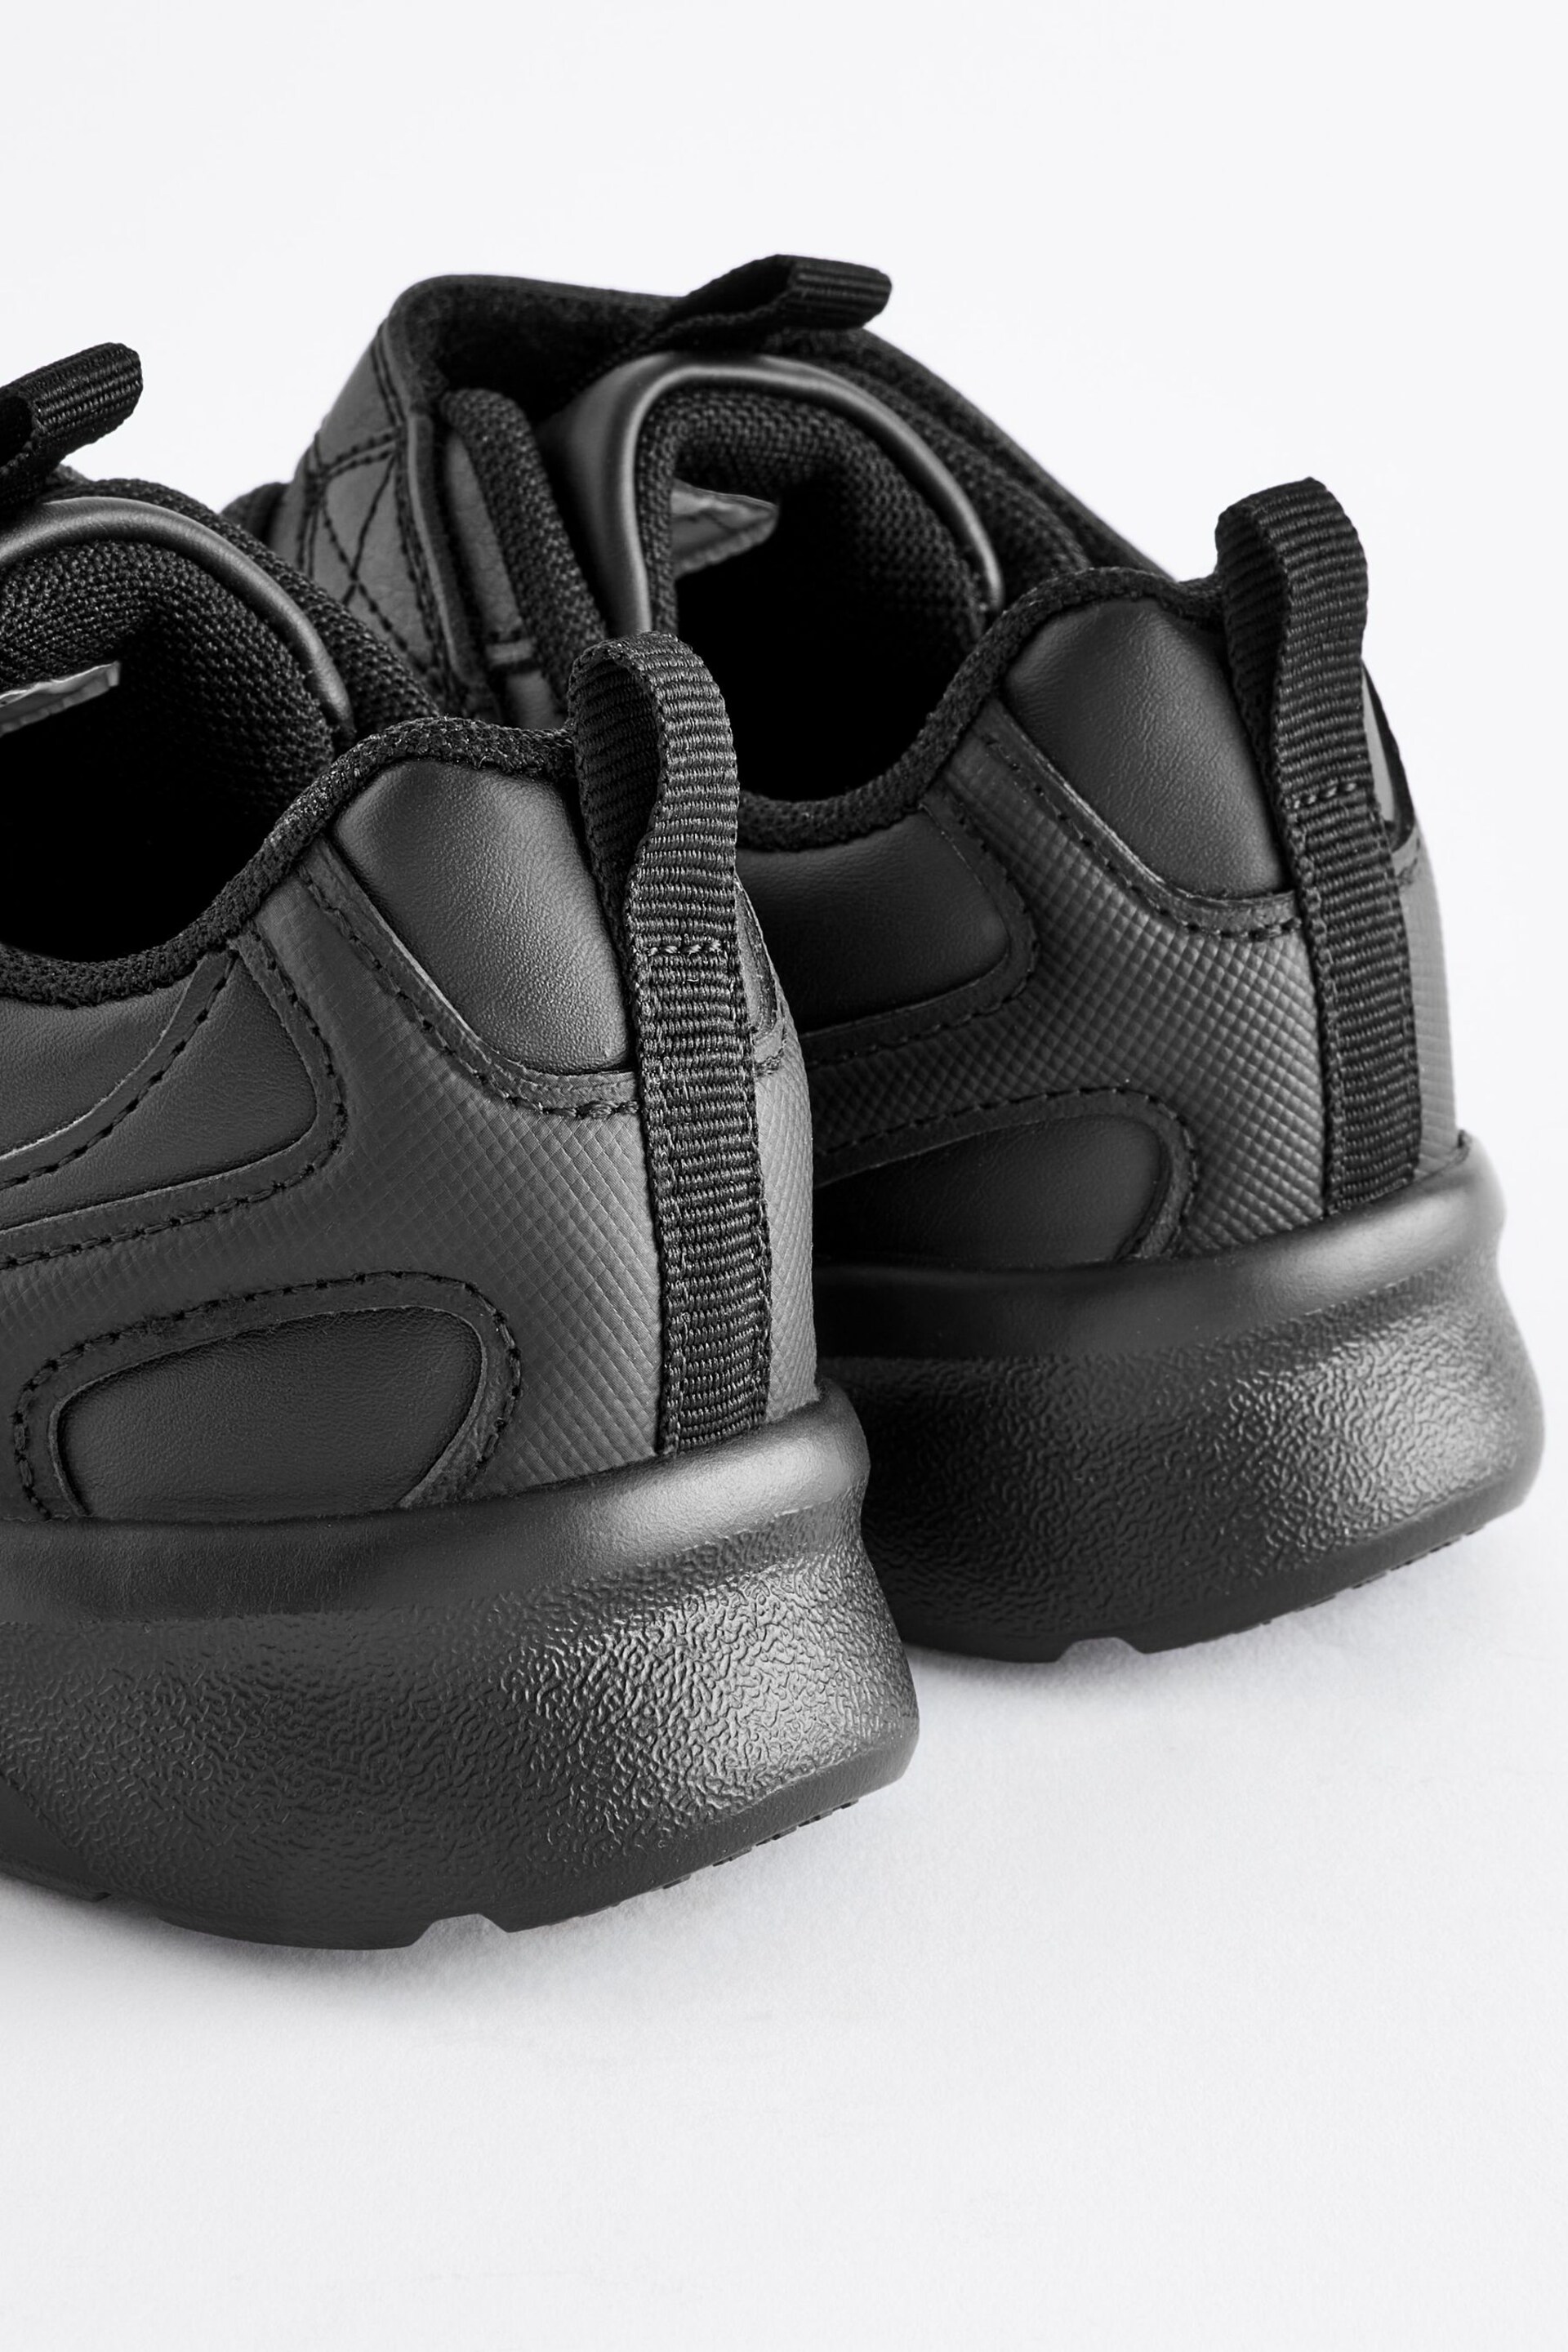 Black Wide Fit (G) Single Strap Trainers - Image 7 of 7